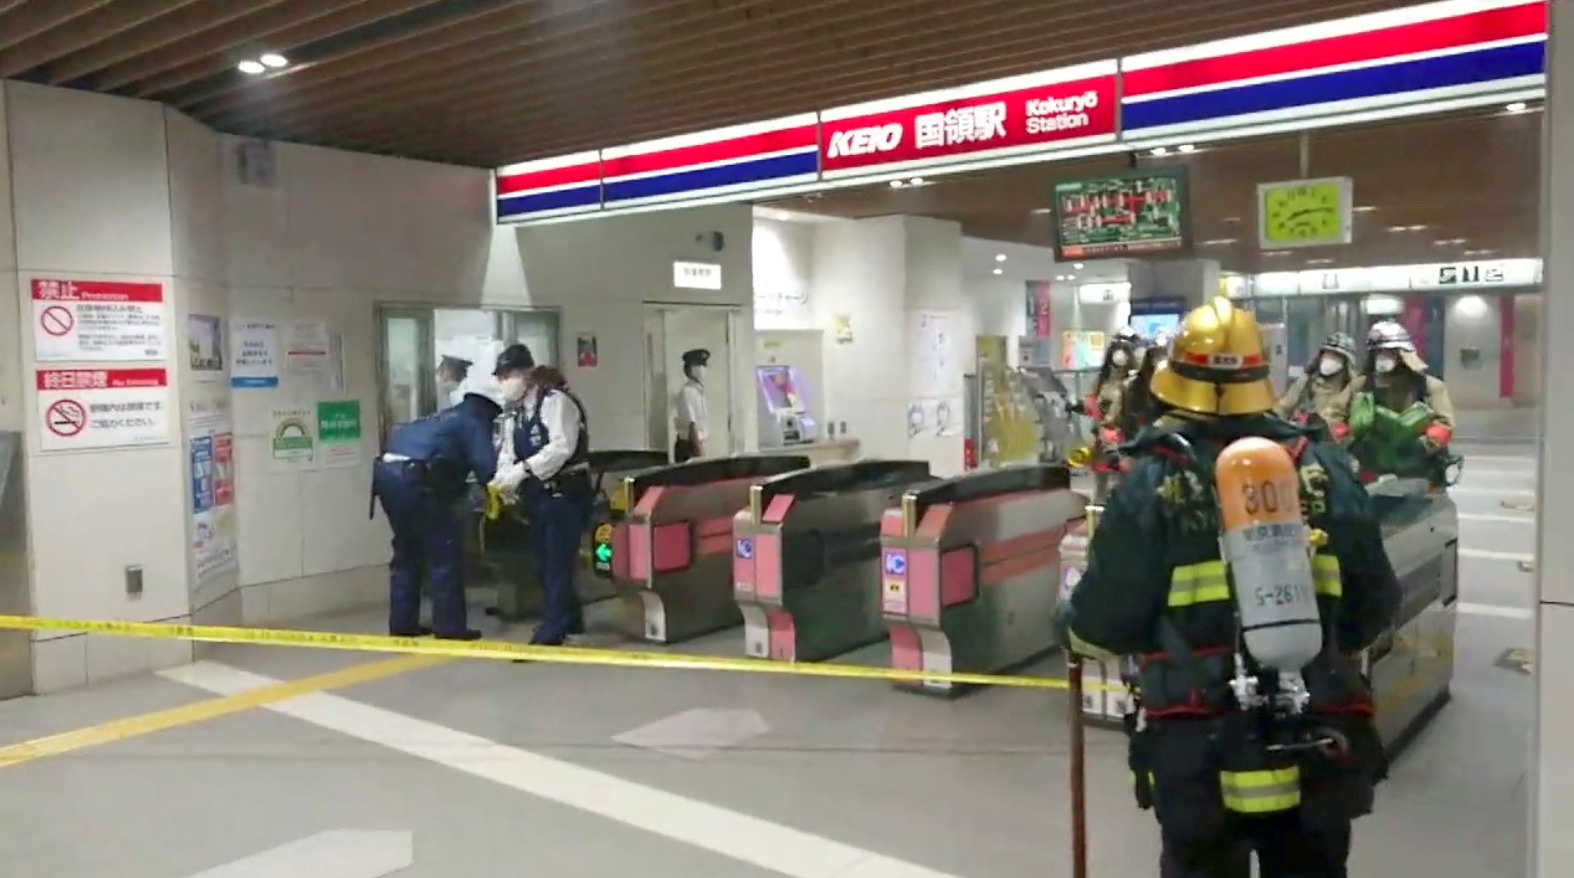 Firefighters and officers work at a Tokyo train station following a knife, arson and acid attack